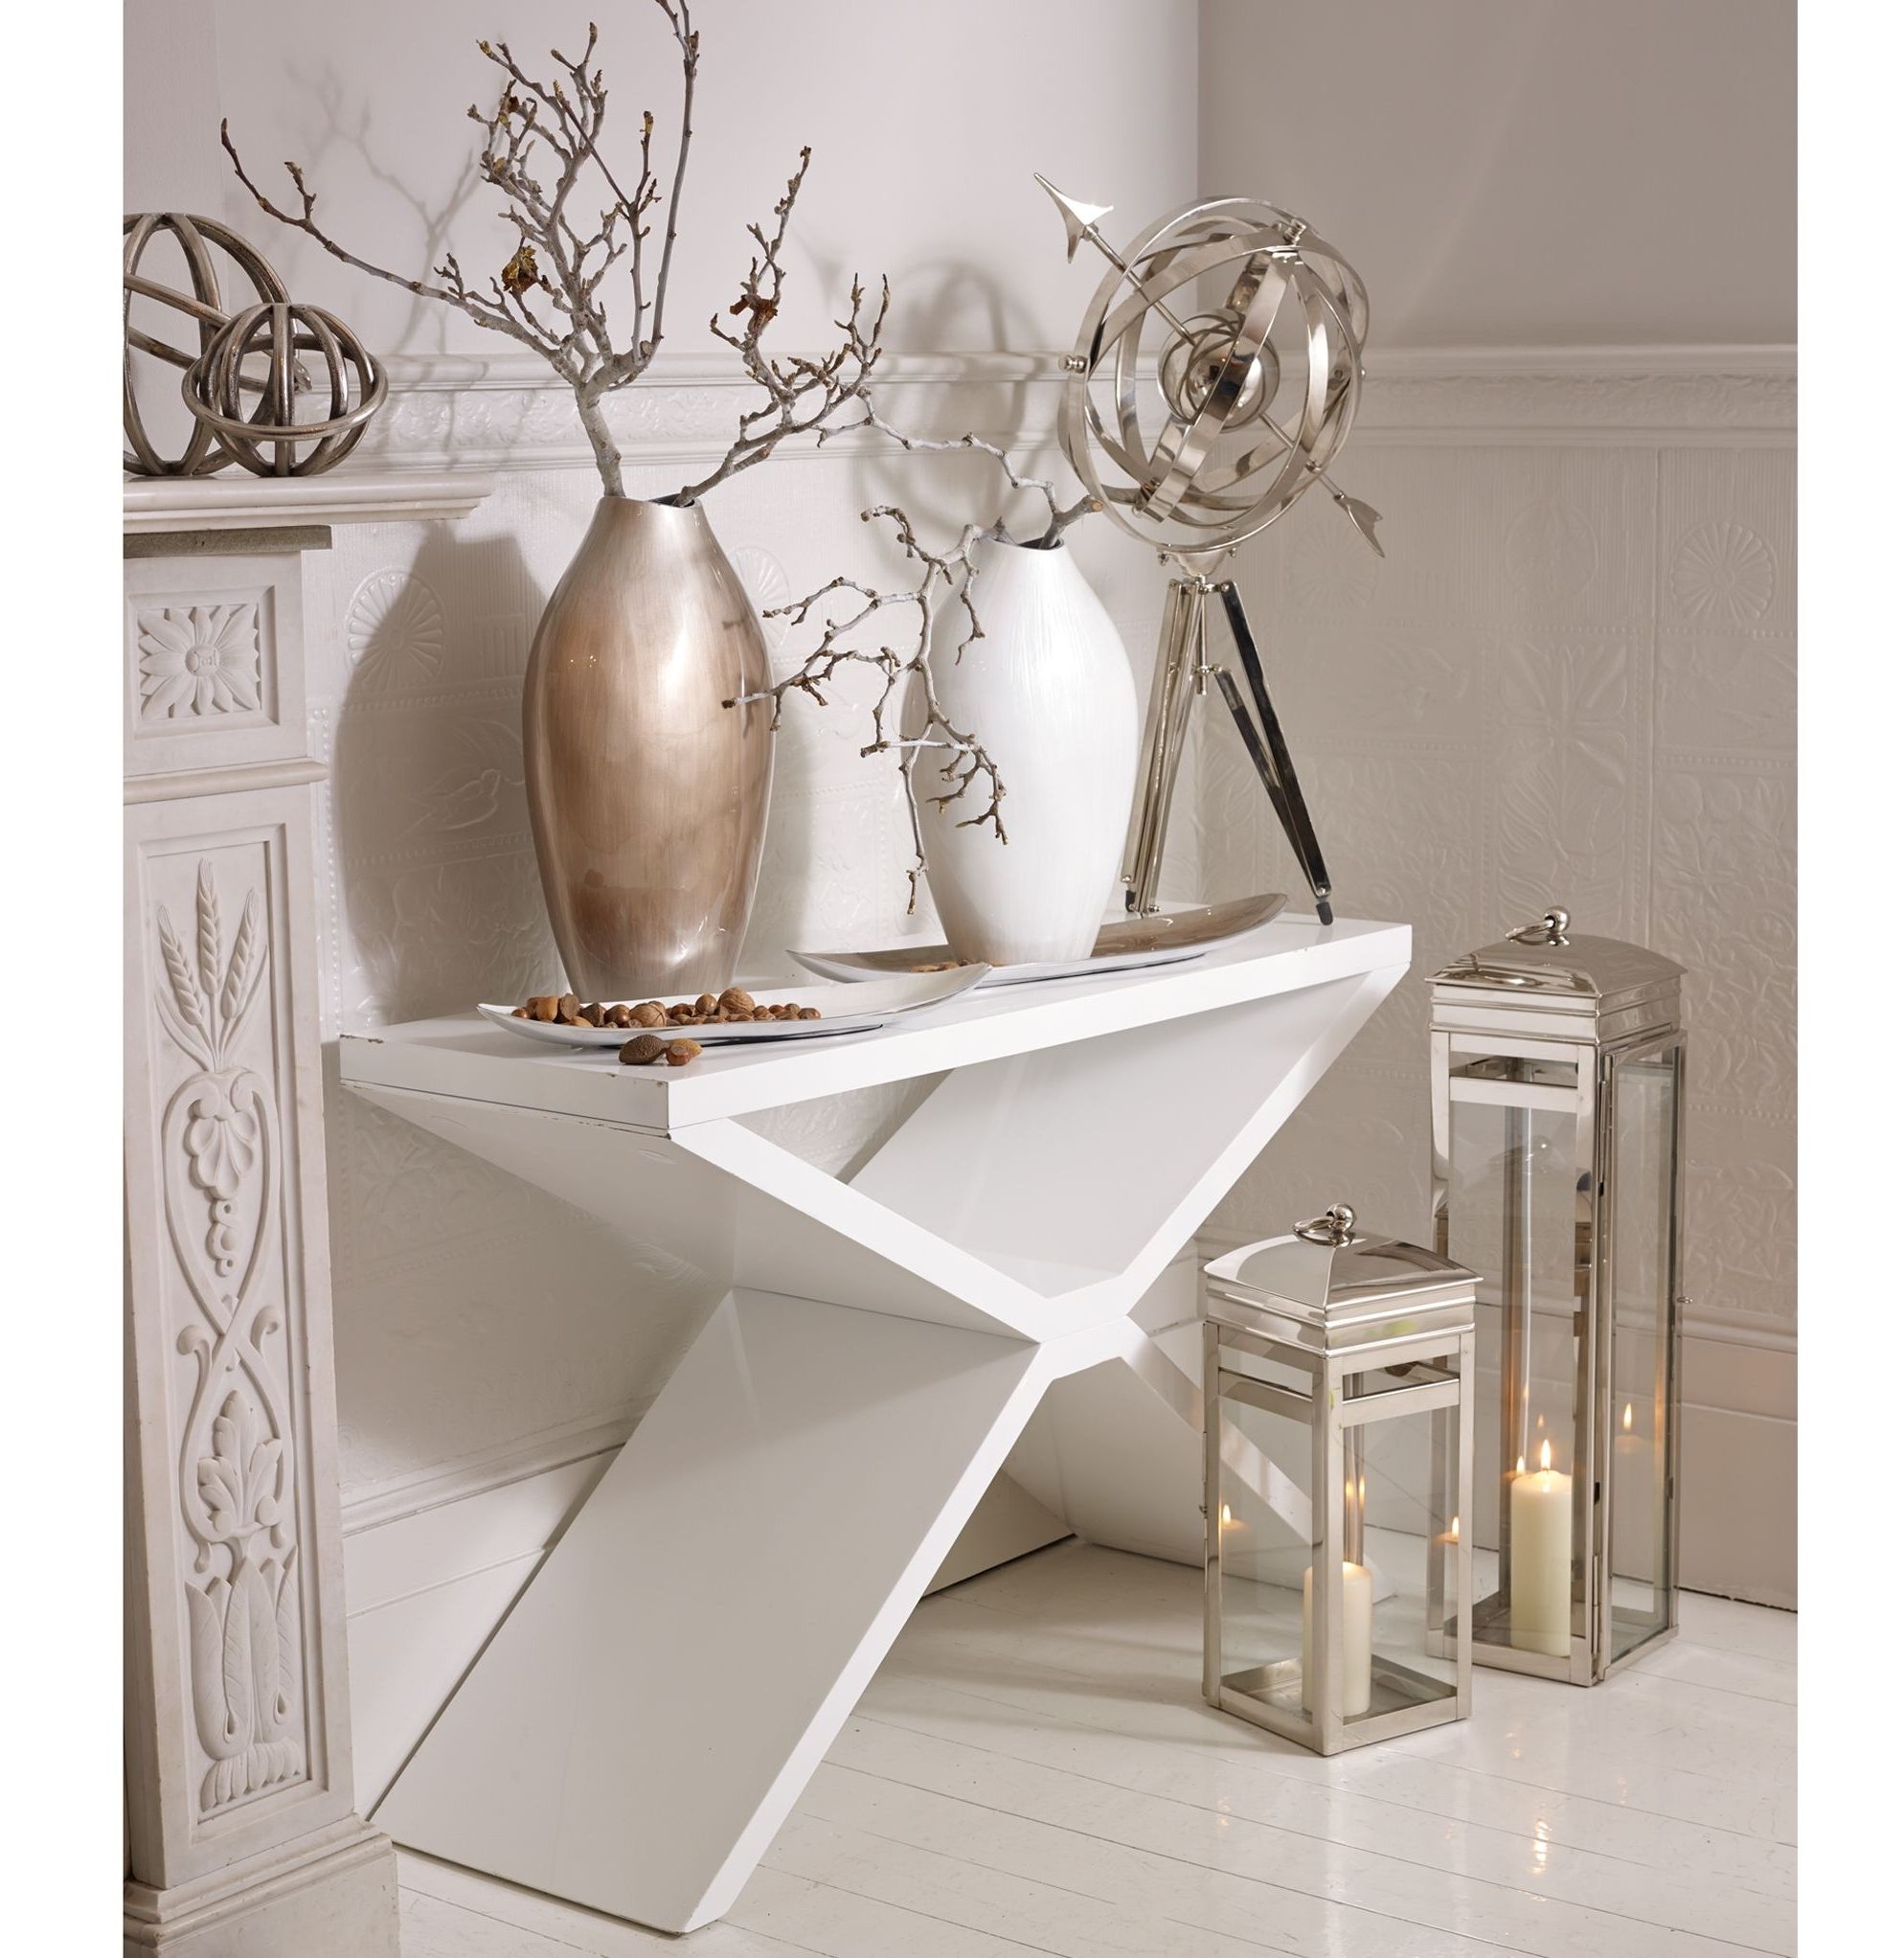 Gloss White Steel Console Tables In Famous White High Gloss Console Table – Ideas On Foter (View 3 of 10)